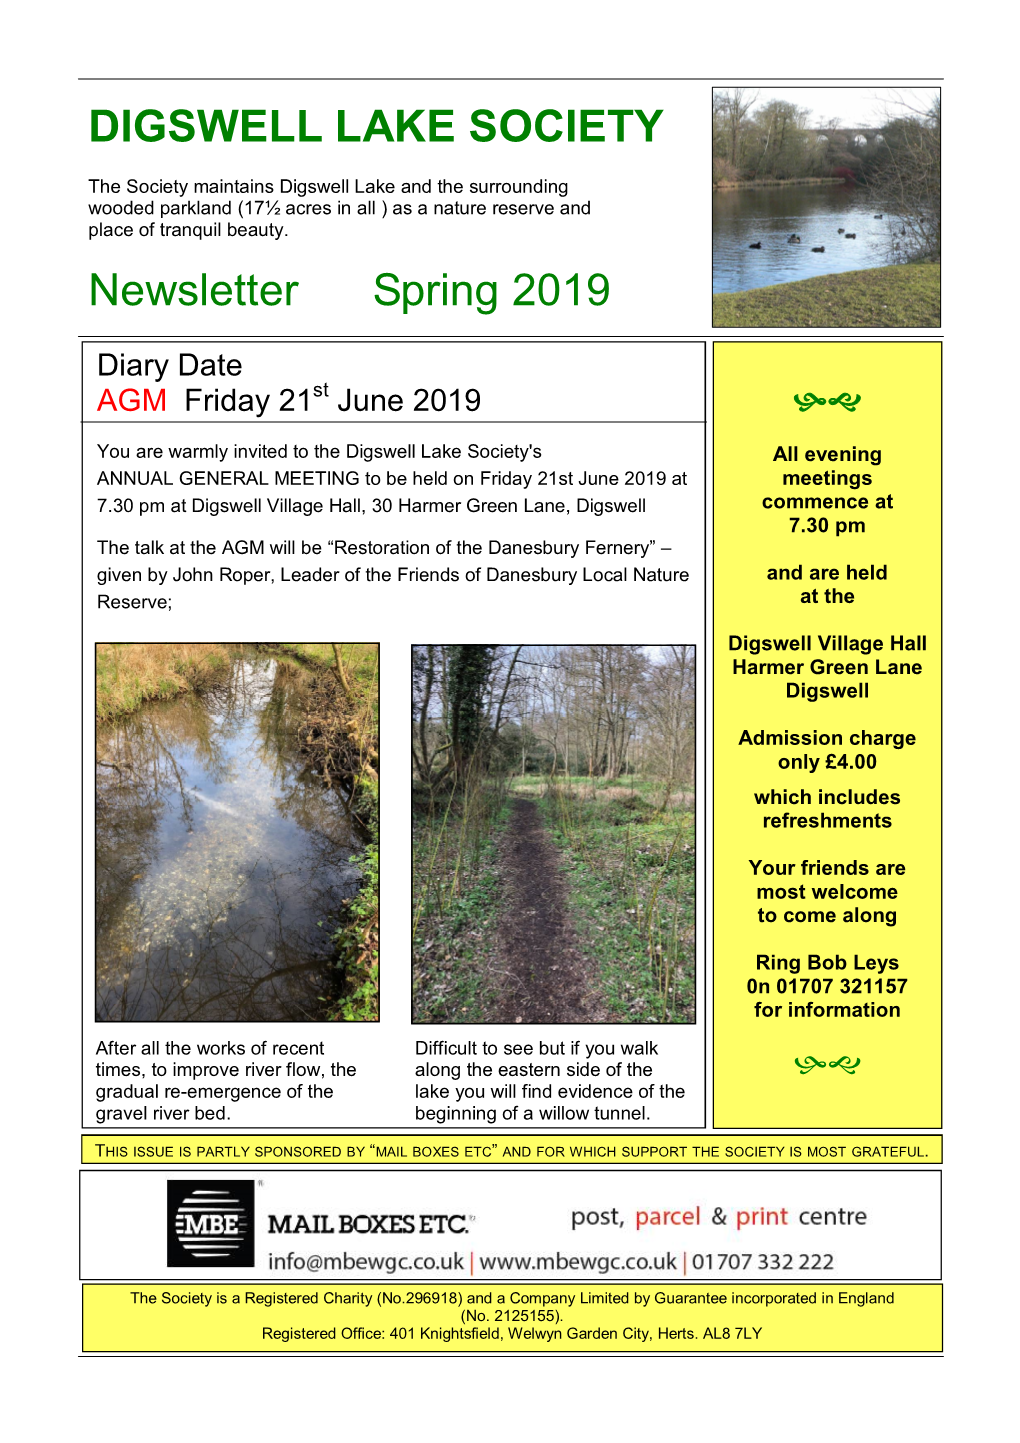 DIGSWELL LAKE SOCIETY Newsletter Spring 2019